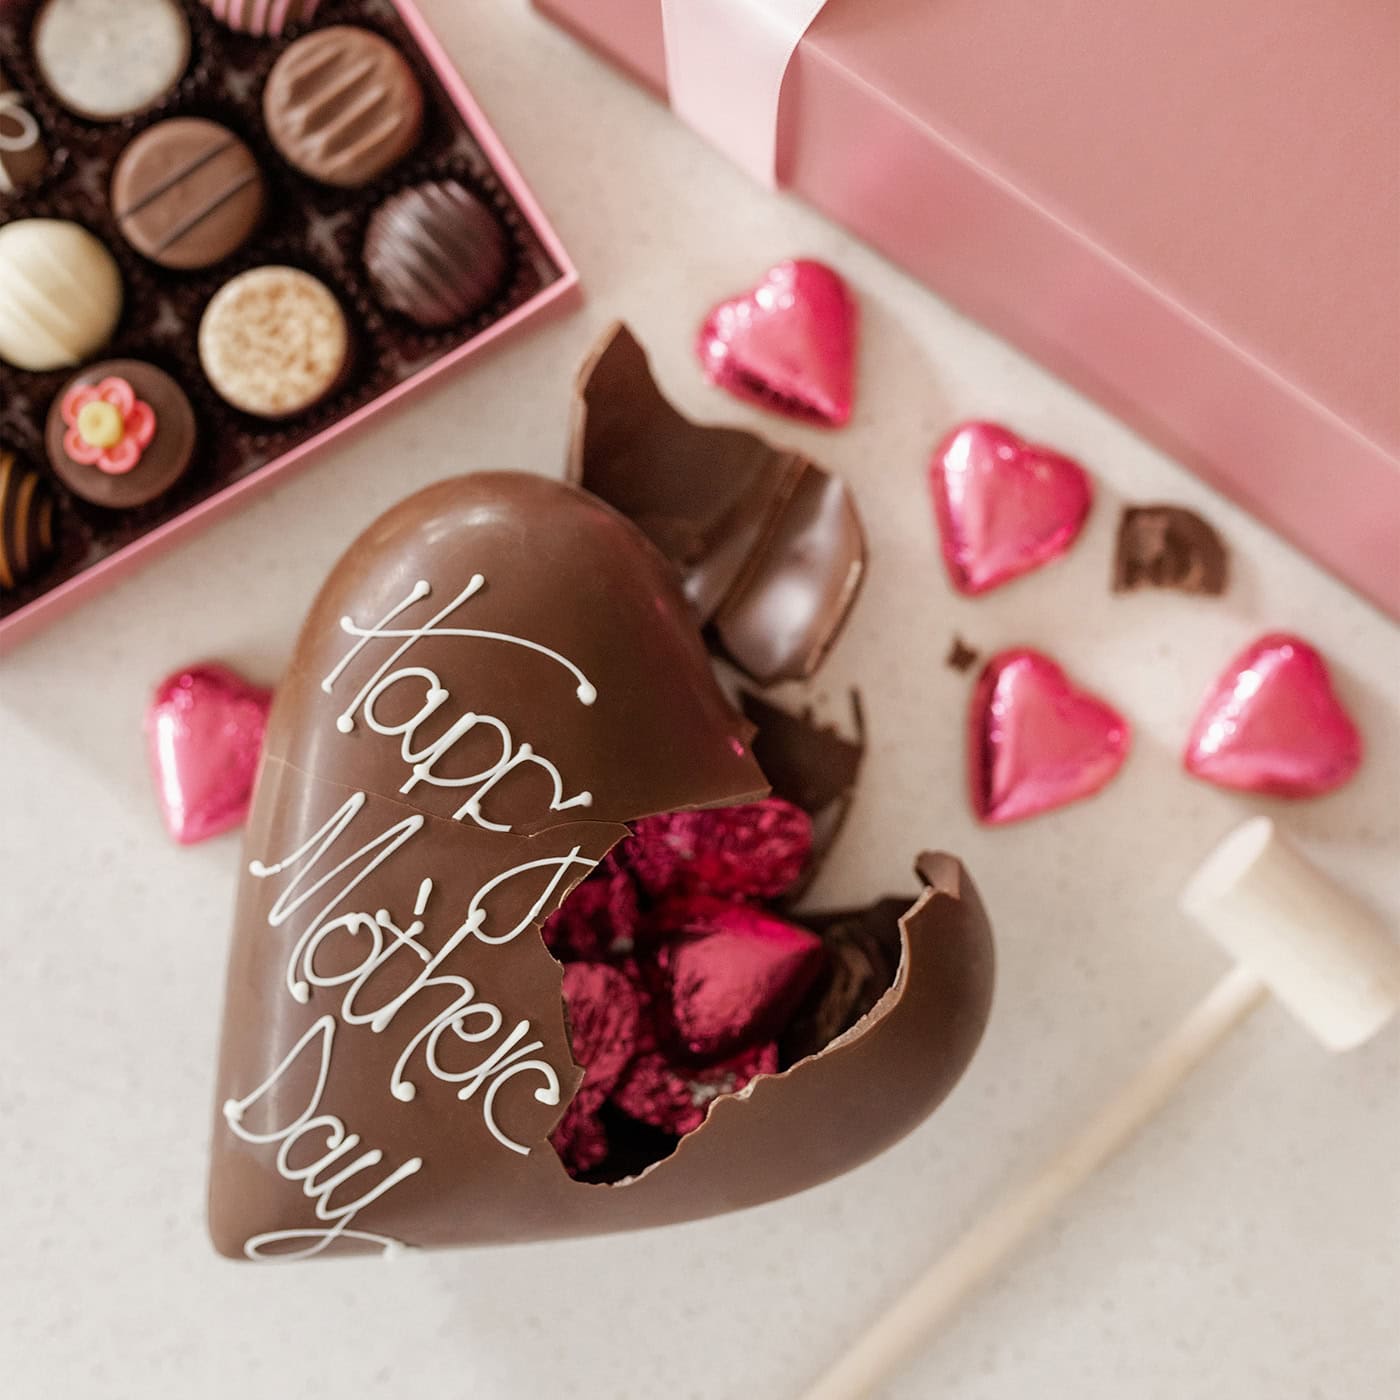 Chocilo Melbourne Mother's Day Chocolate Smash Heart